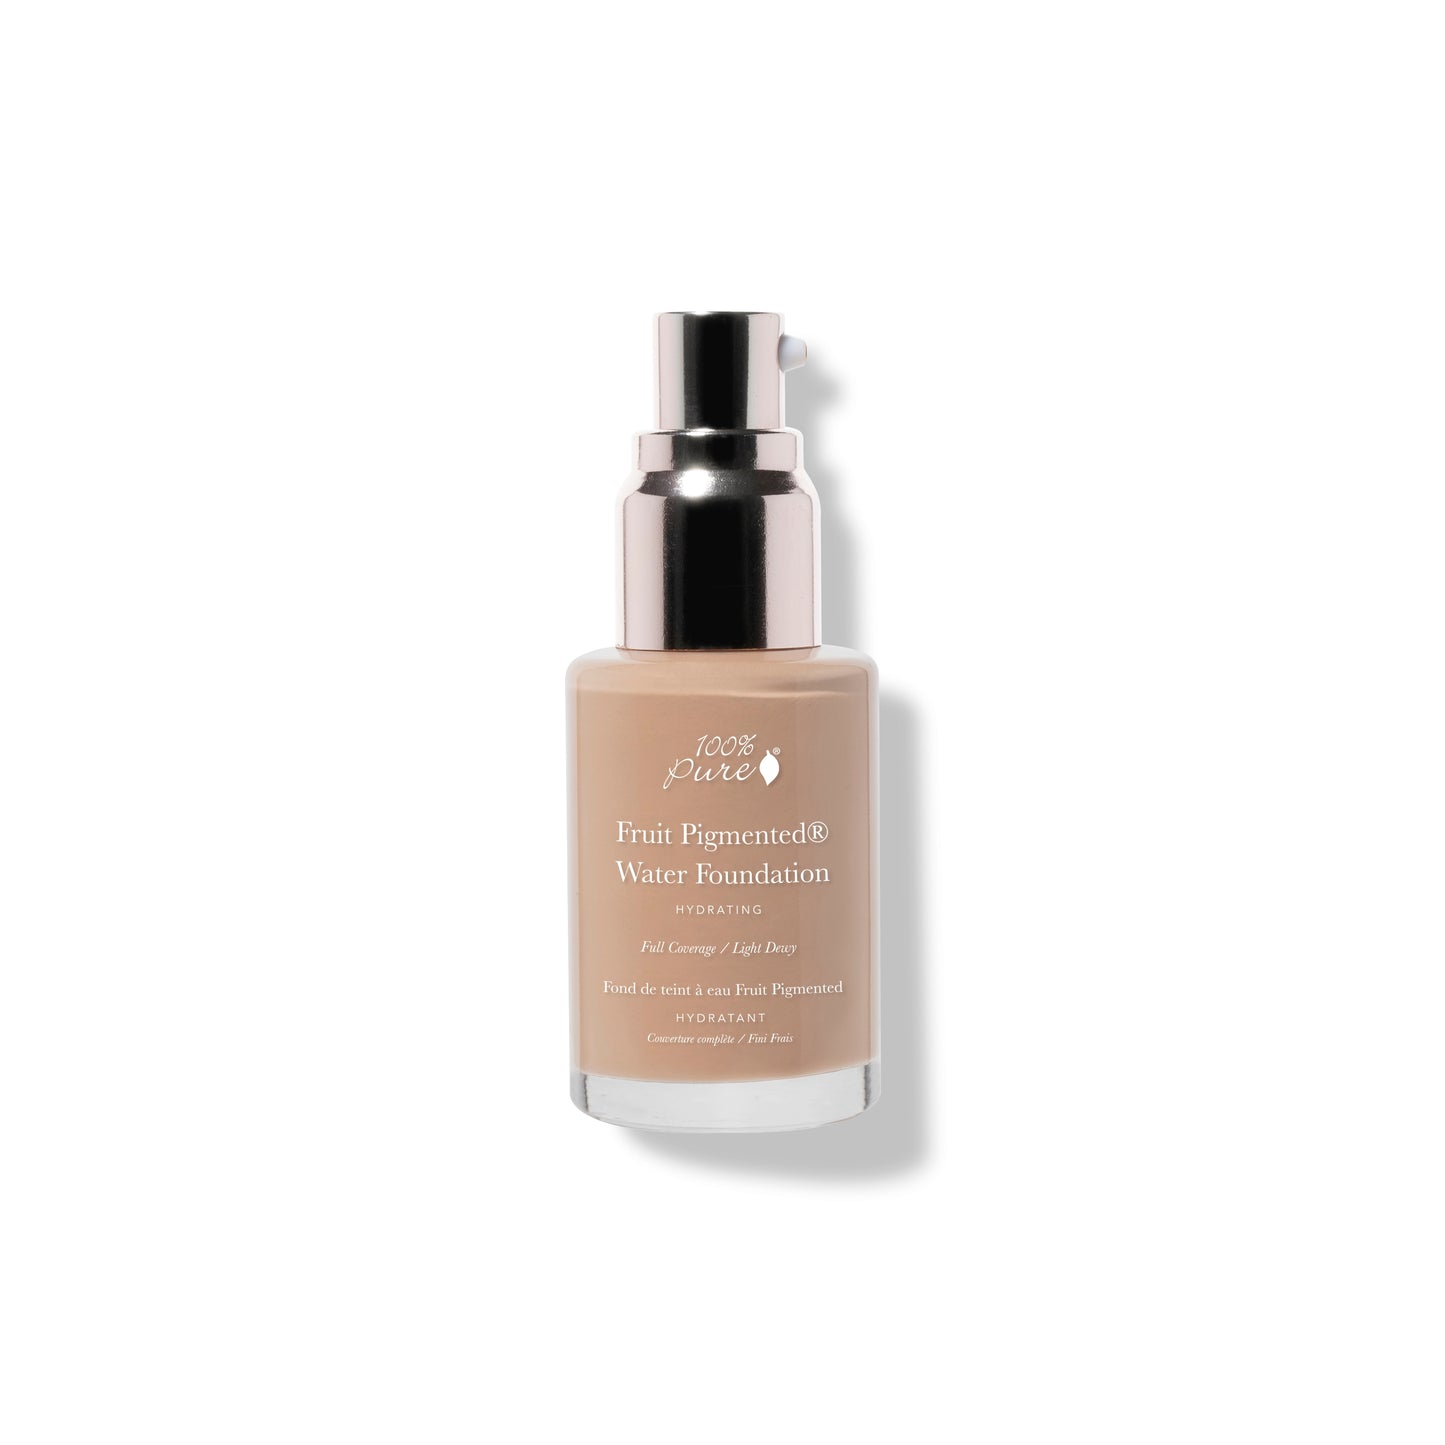 100% PURE Fruit Pigmented Full Coverage Water Foundation warm 5.0